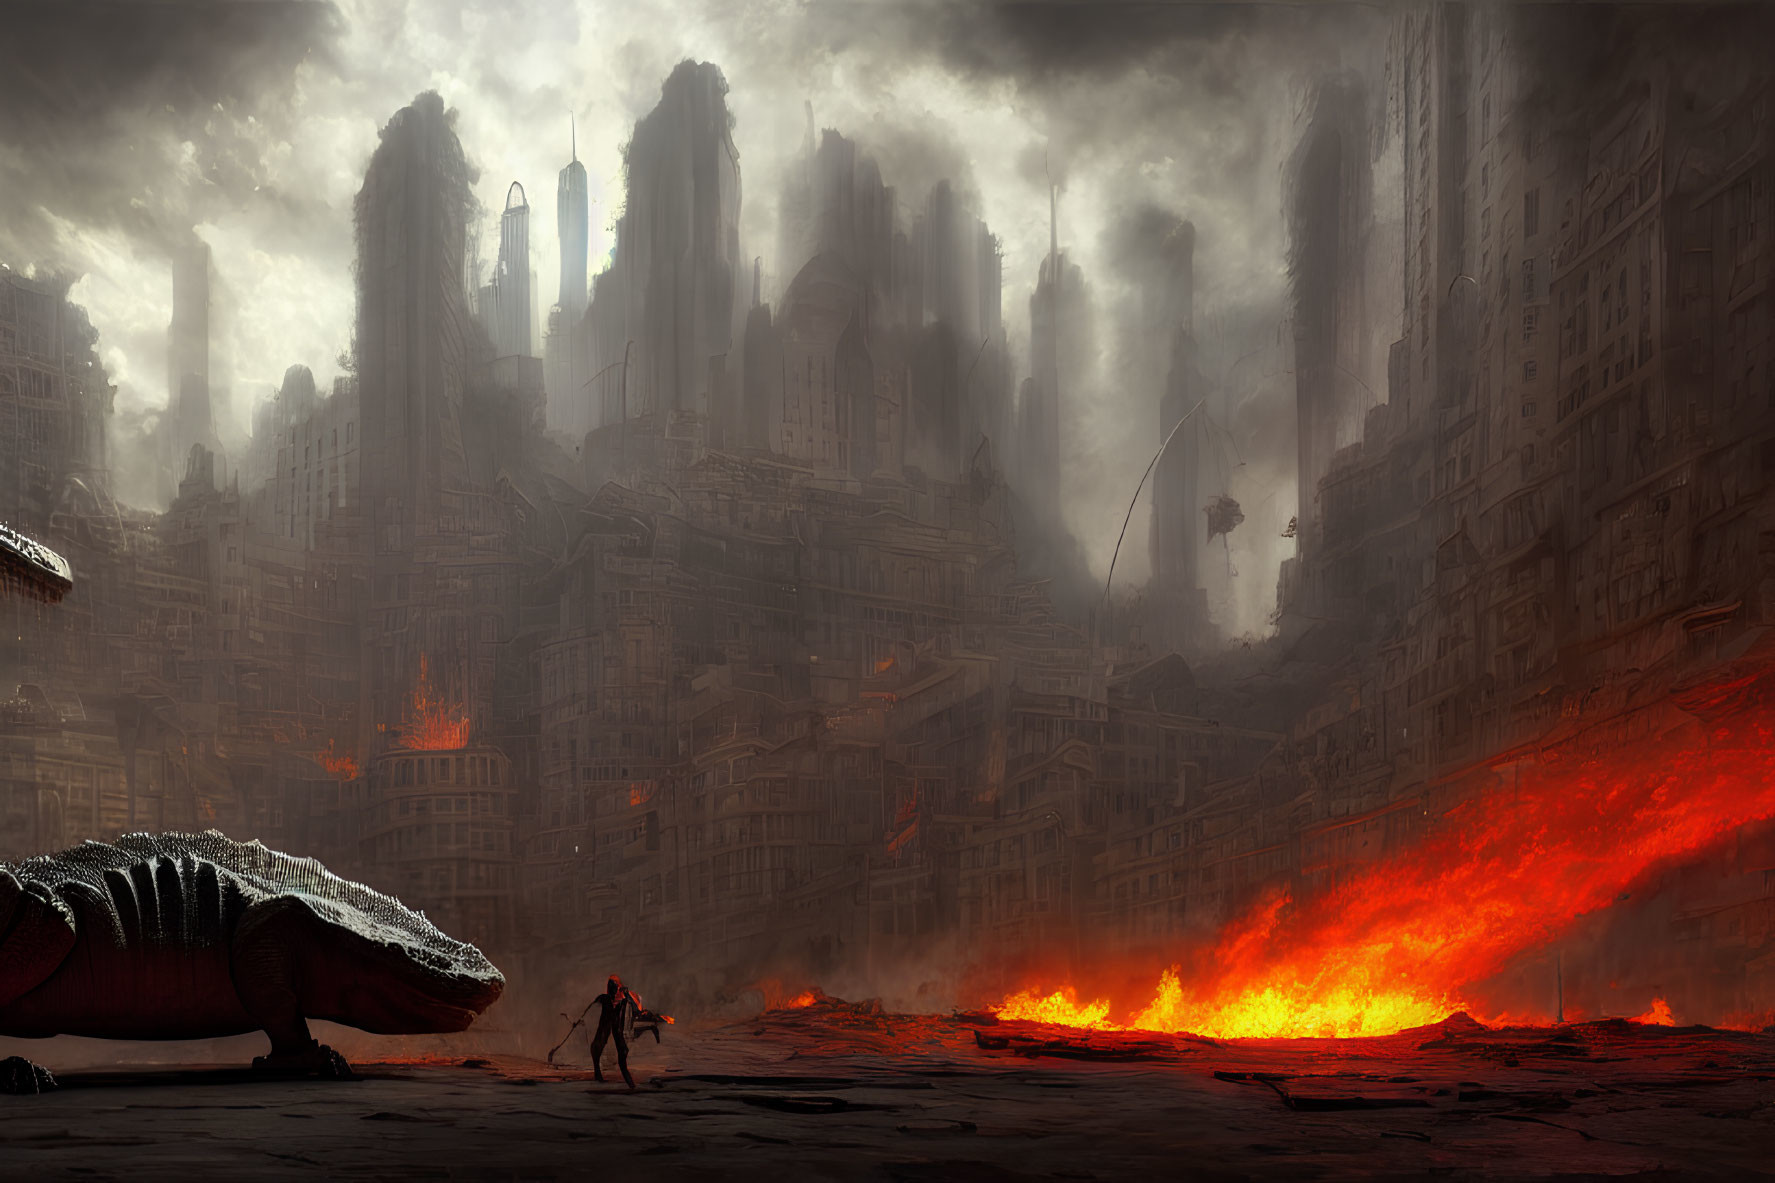 Post-apocalyptic cityscape with lava streams, colossal worm, and lone figure in desolation.